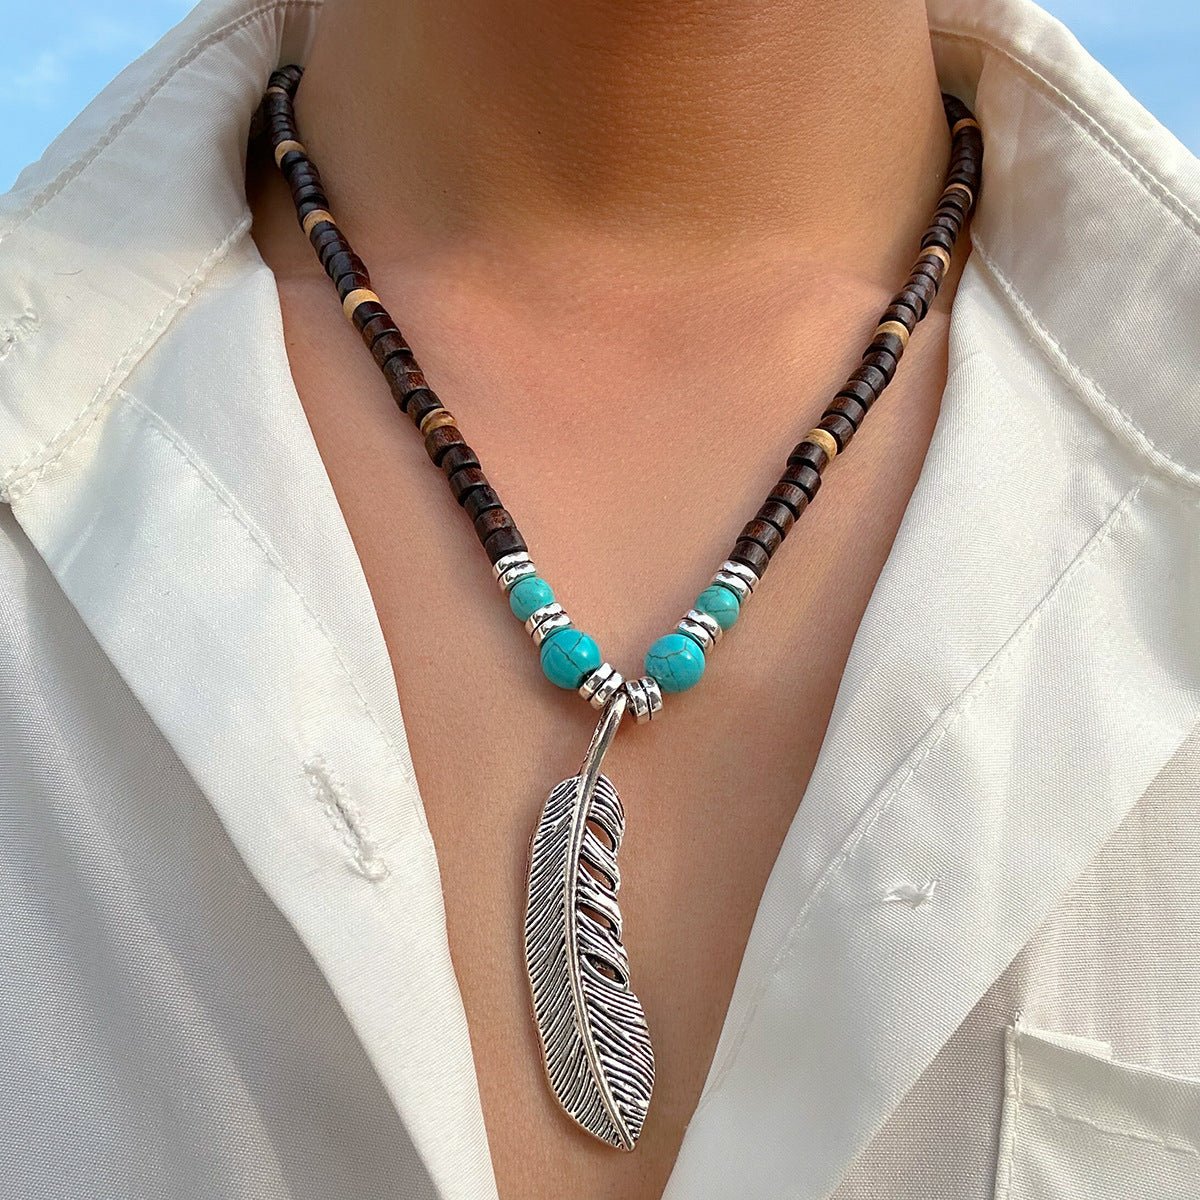 Exquisite and trendy mosaic wooden beads and turquoise with feather design pendant necklace - Syble's